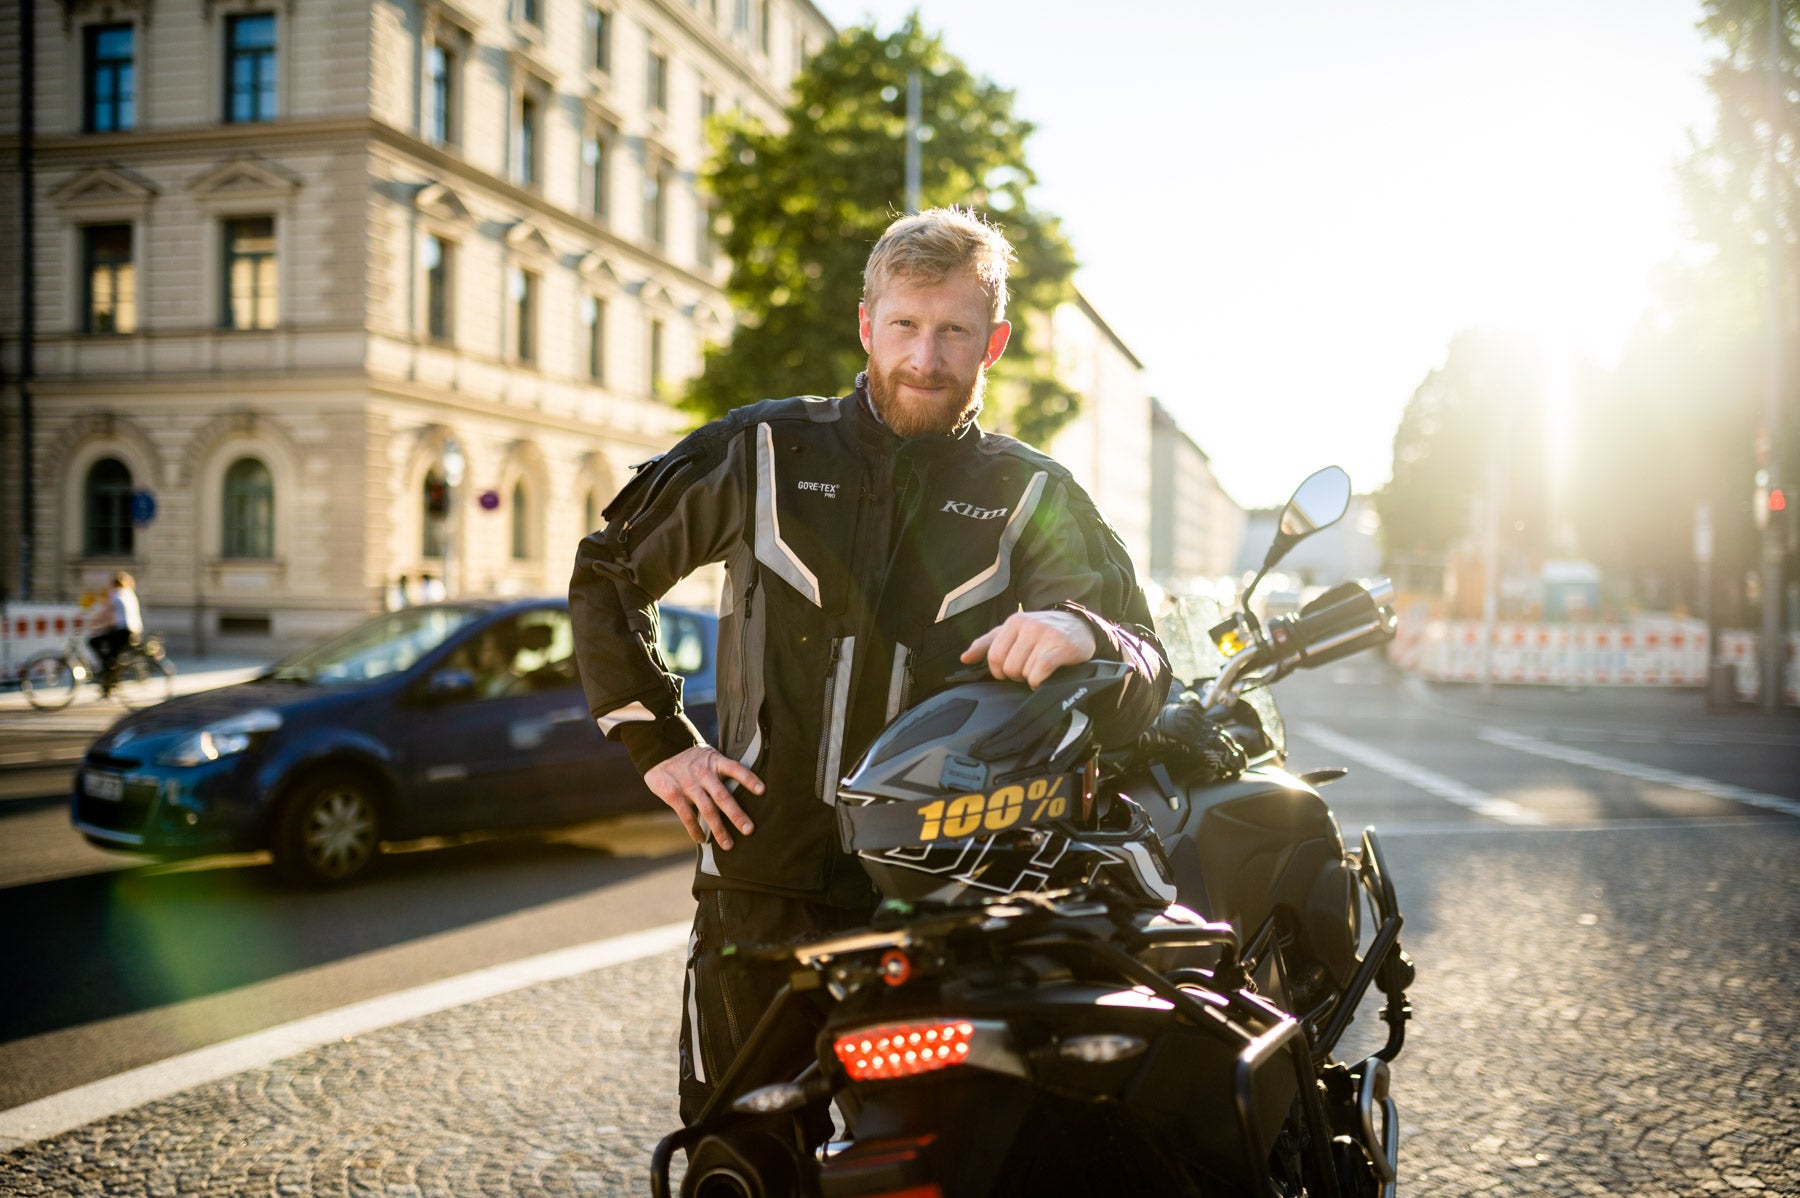 You are riding your motorcycle in the city and encounter an accident or get into one yourself, so you can get help quickly with Dguard emergency call system. 